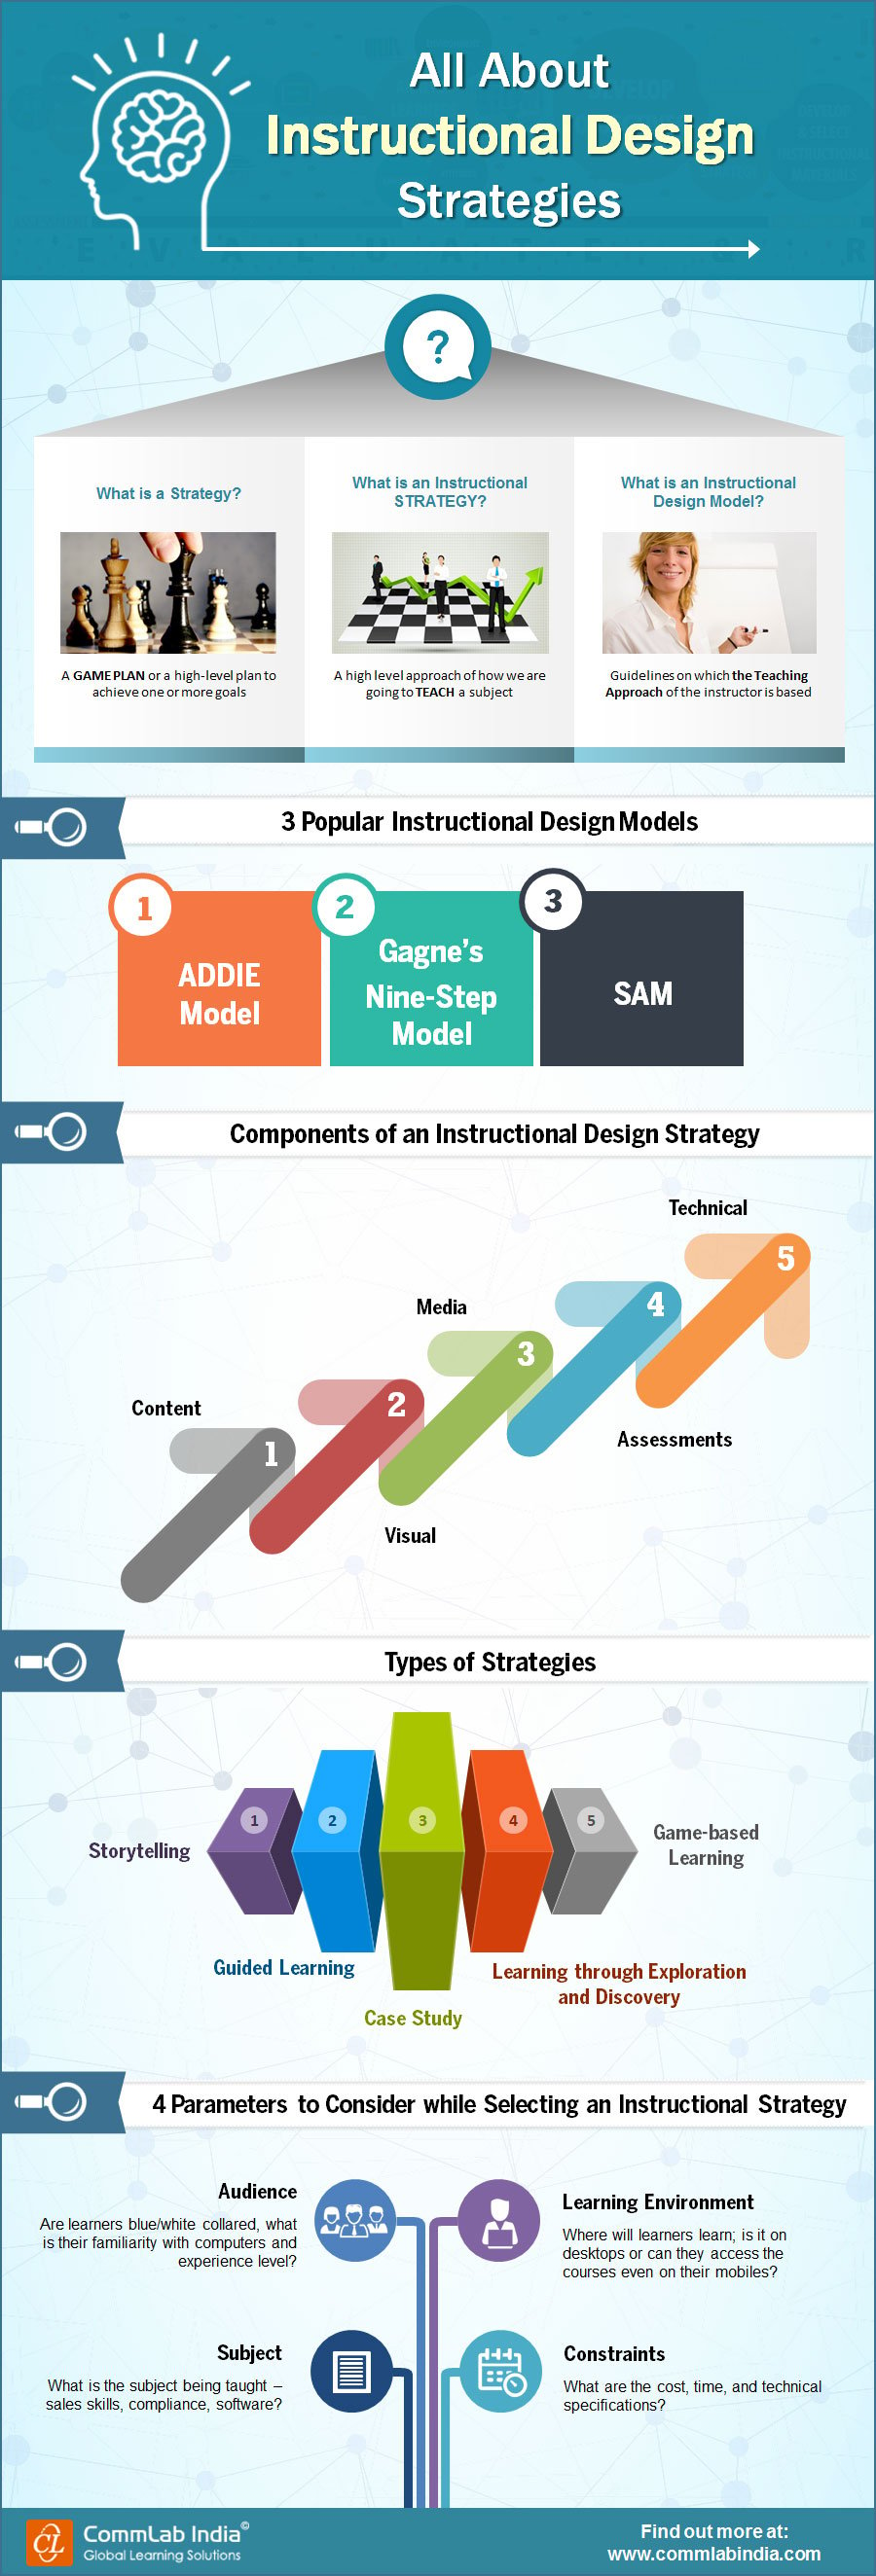 All About Instructional Design Strategies [Infographic]